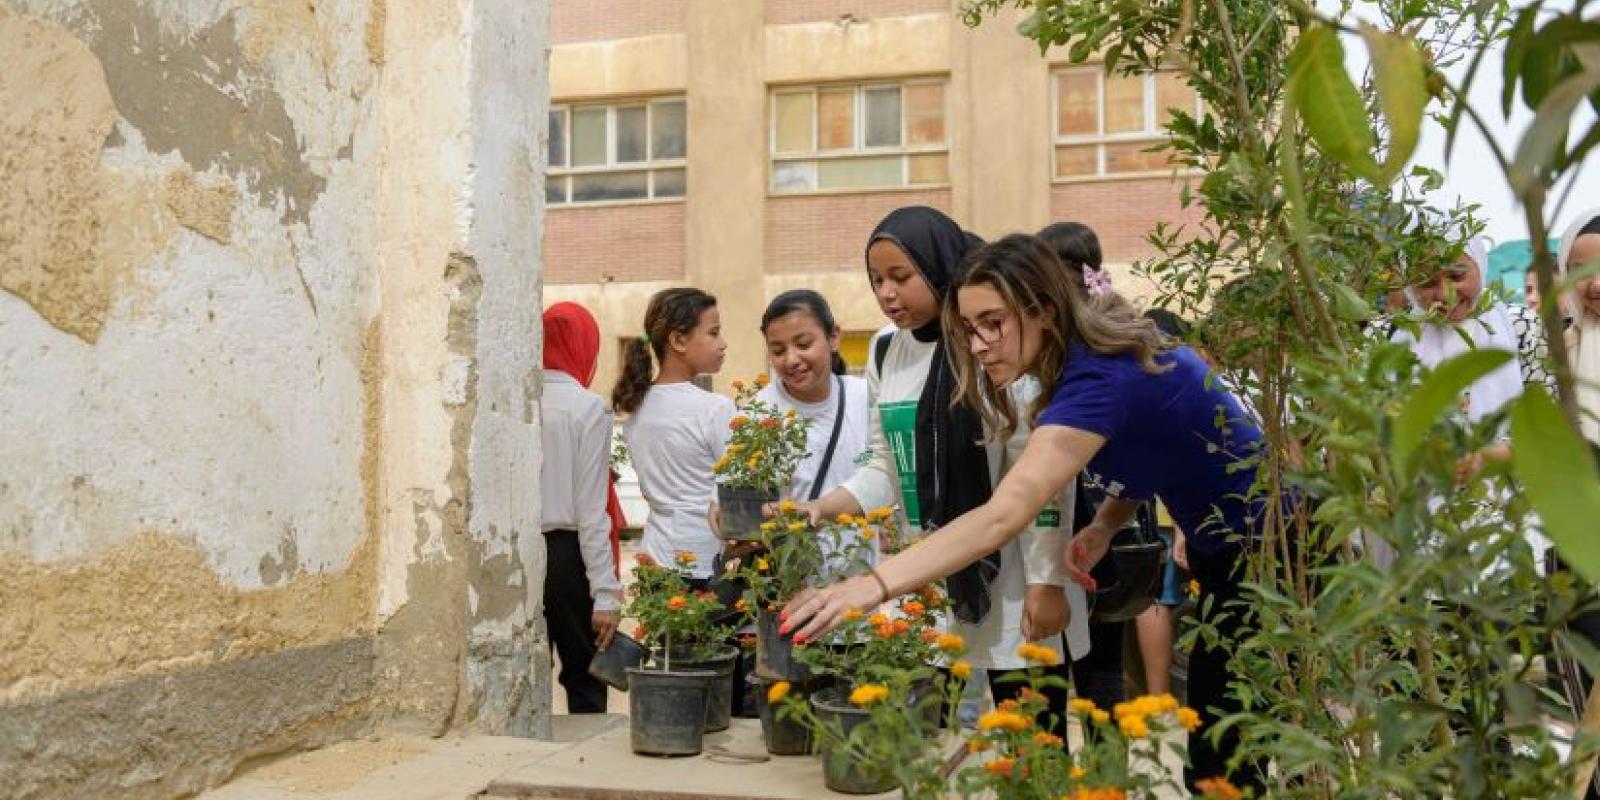 Students planting flowers at a school, as part of the collaboration between AUC and Ministry of Education